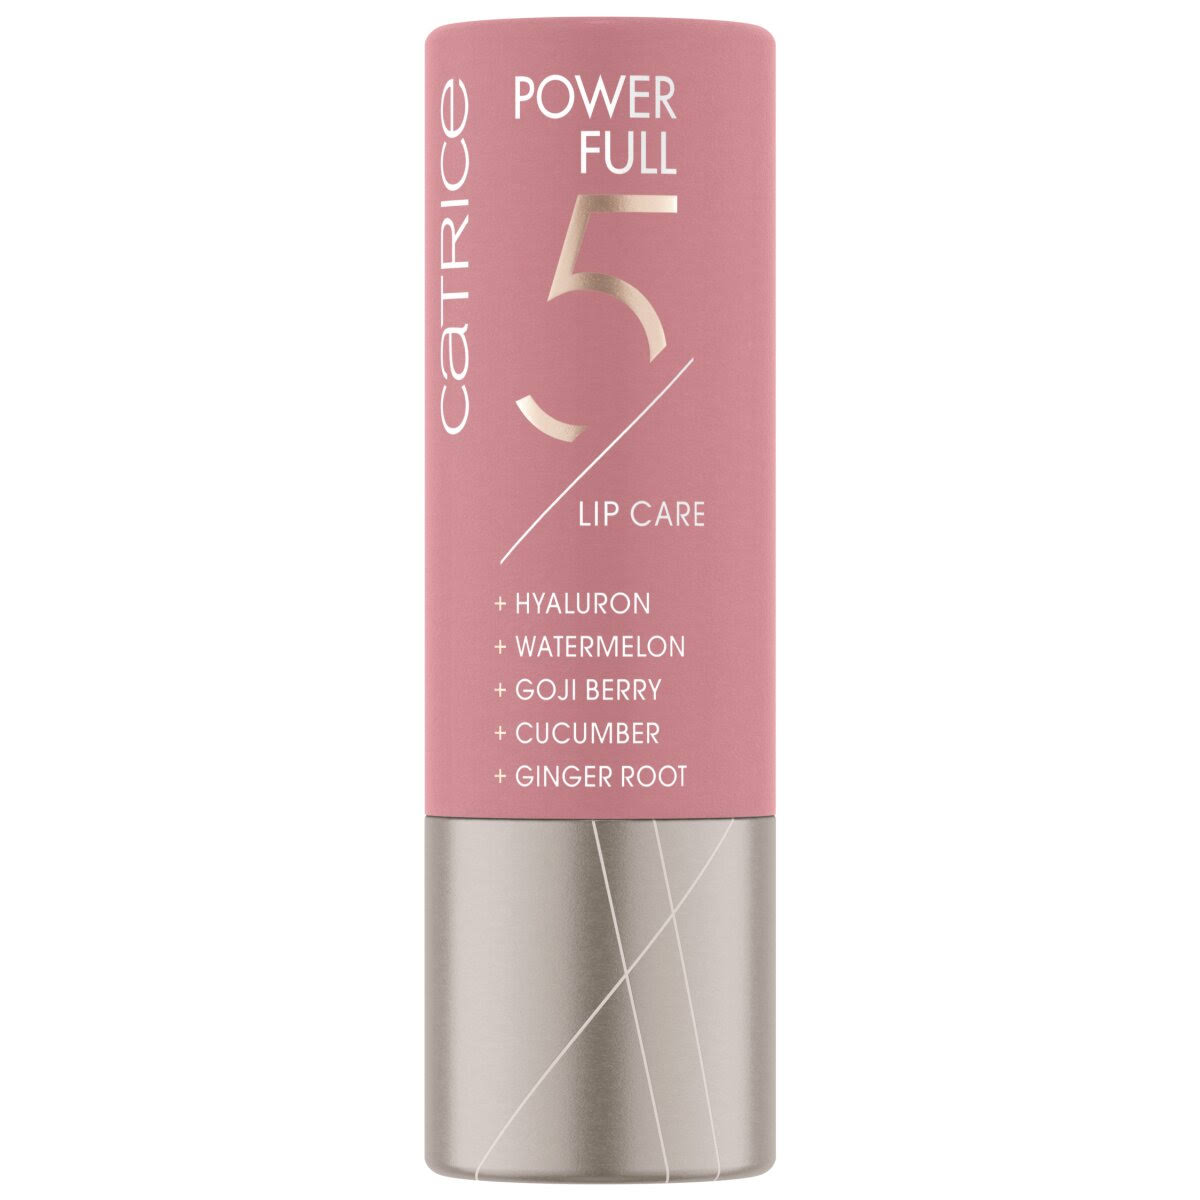 Catrice Power Full 5 Lip Care - 20 - Sparkling Guave